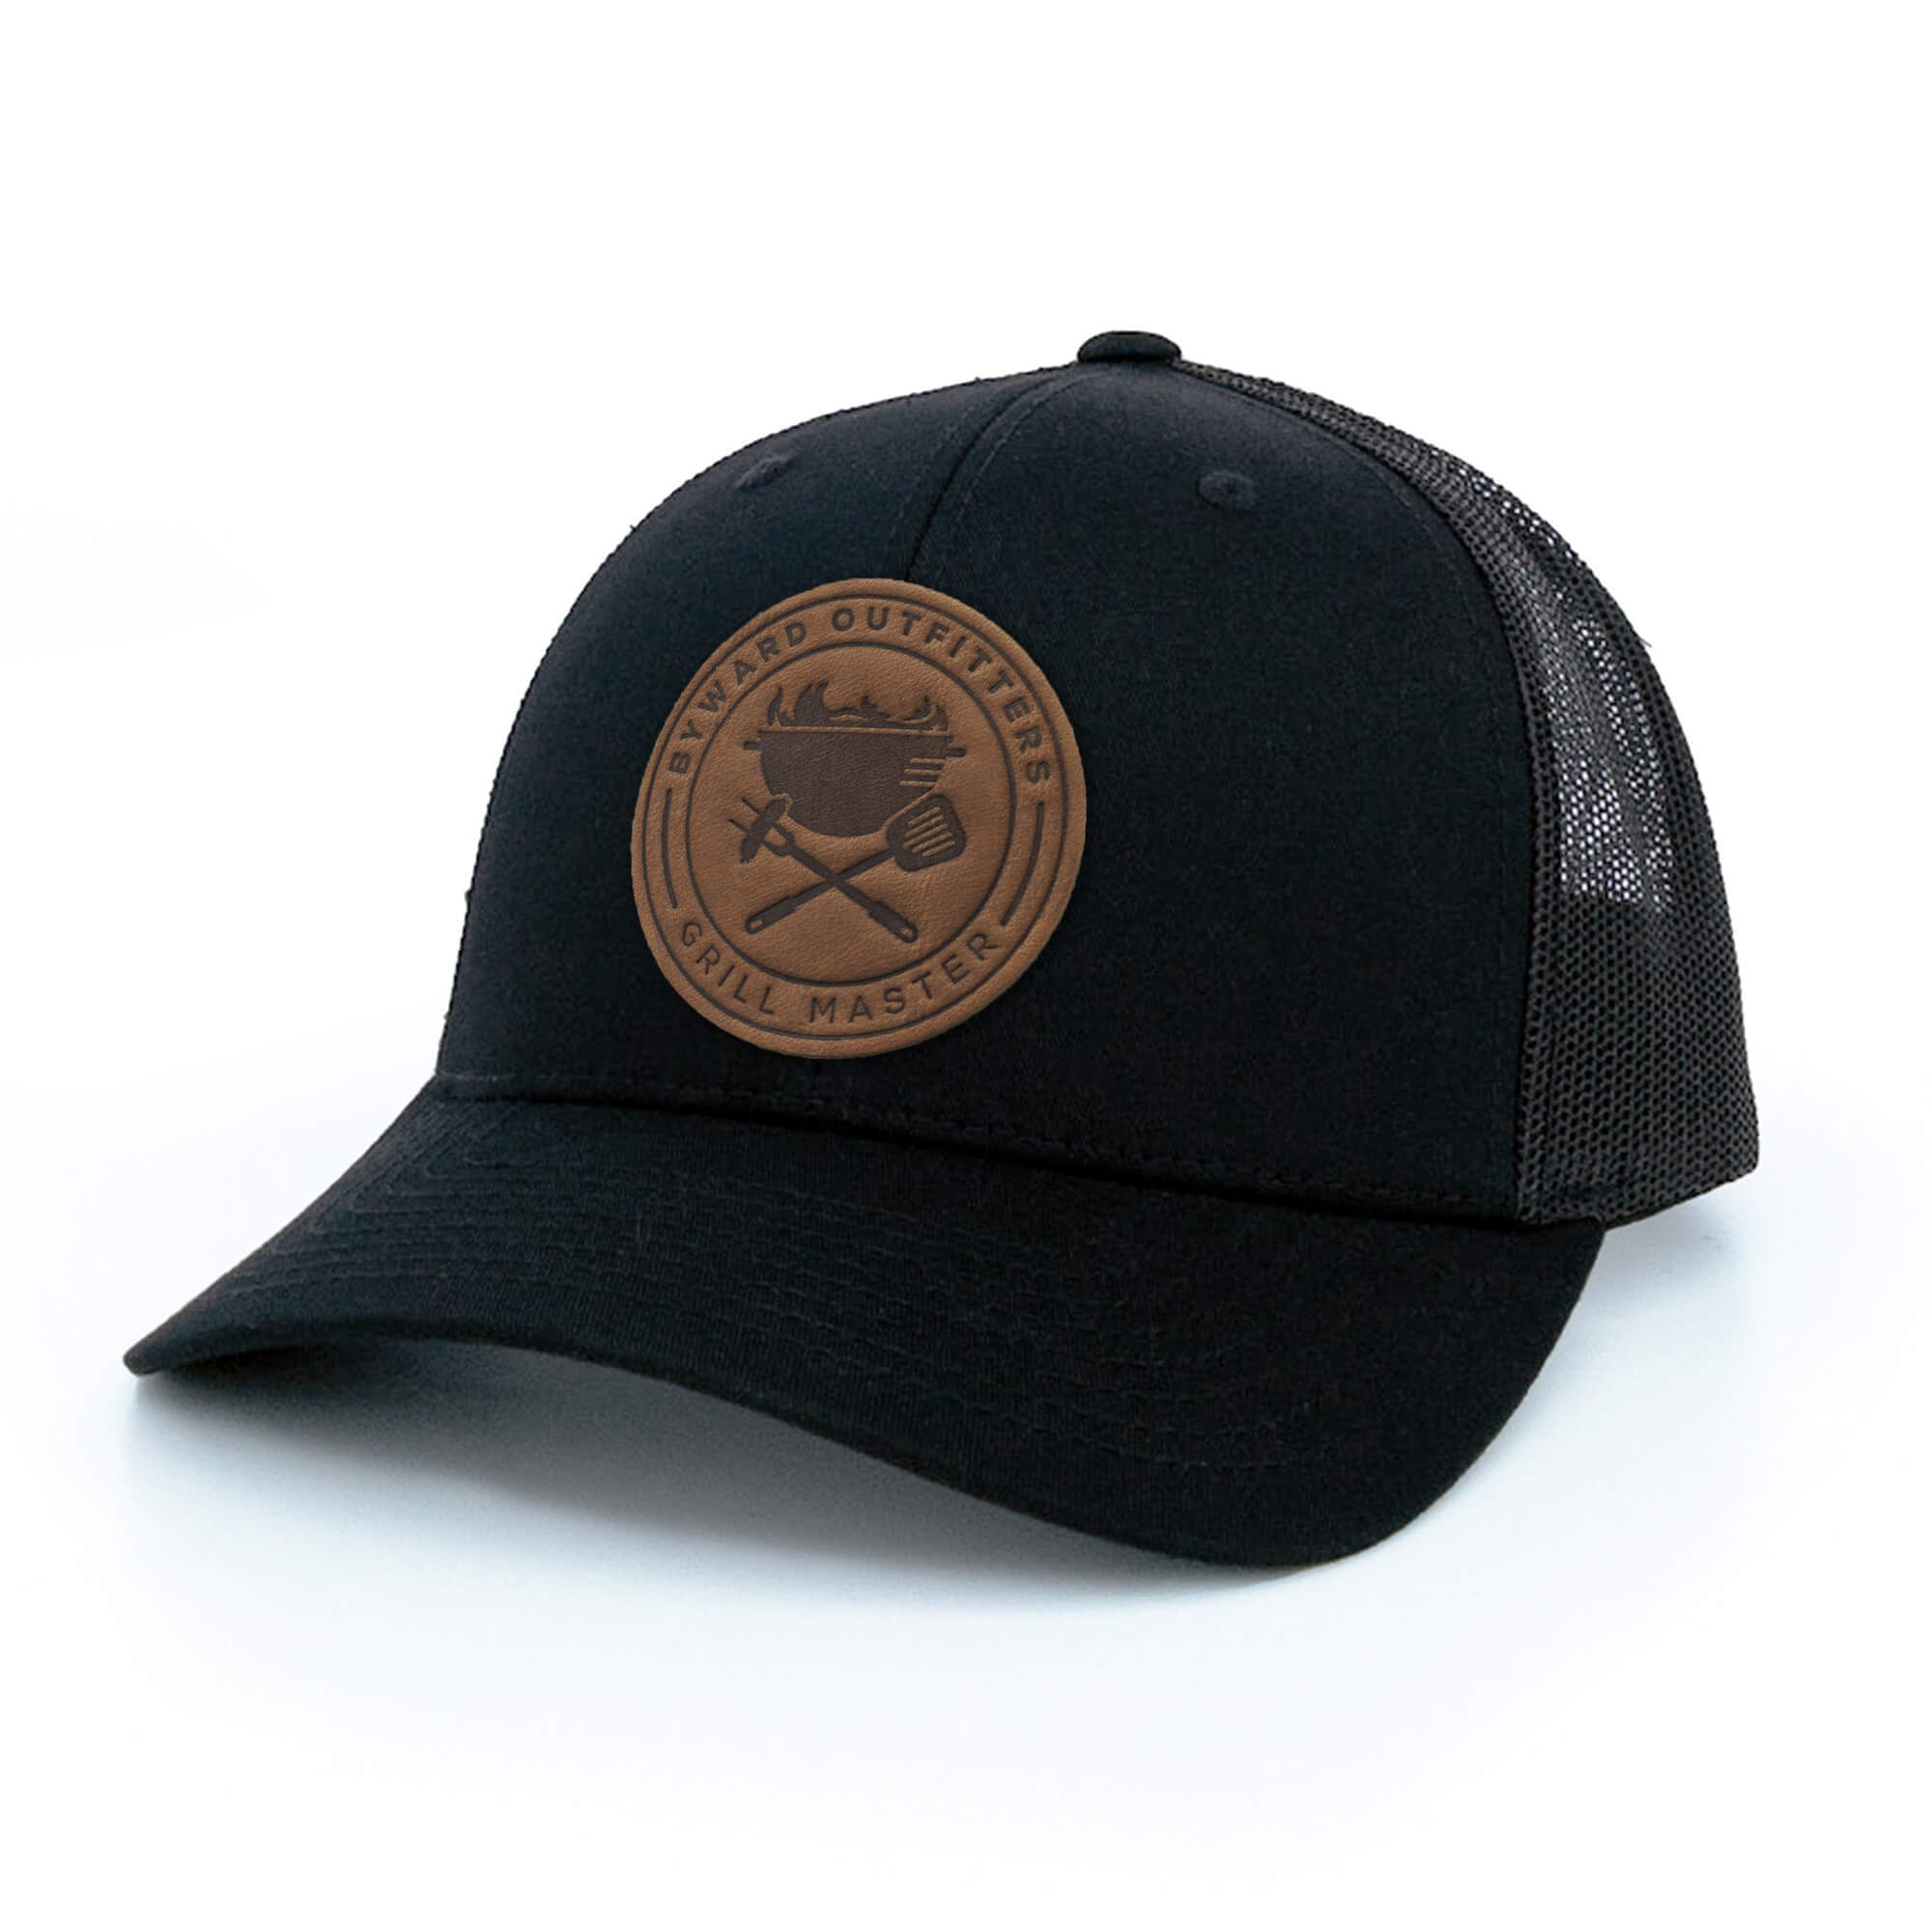 Black trucker hat with full-grain leather patch of Grill Master | BLACK-006-002, CHARC-006-002, NAVY-006-002, HGREY-006-002, MOSS-006-002, BROWN-006-002